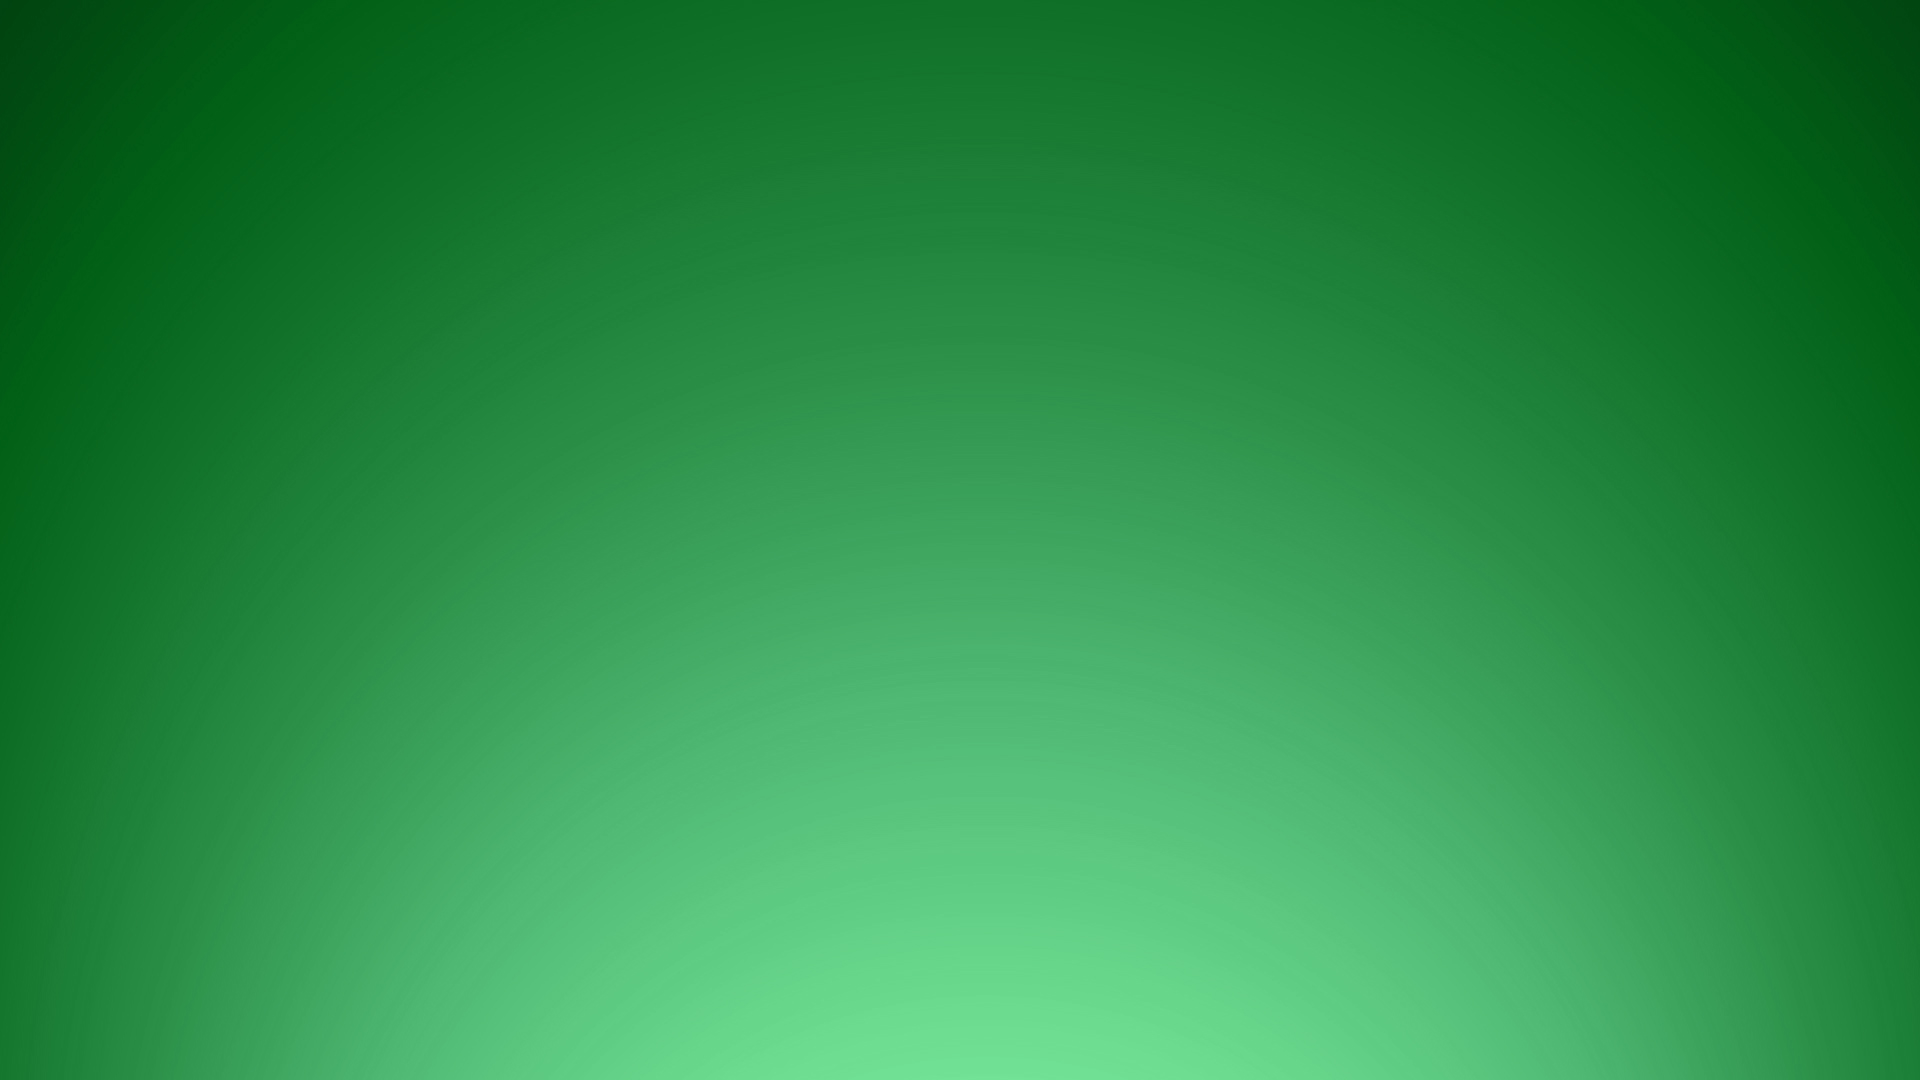 10+ Artistic Green HD Wallpapers and Backgrounds